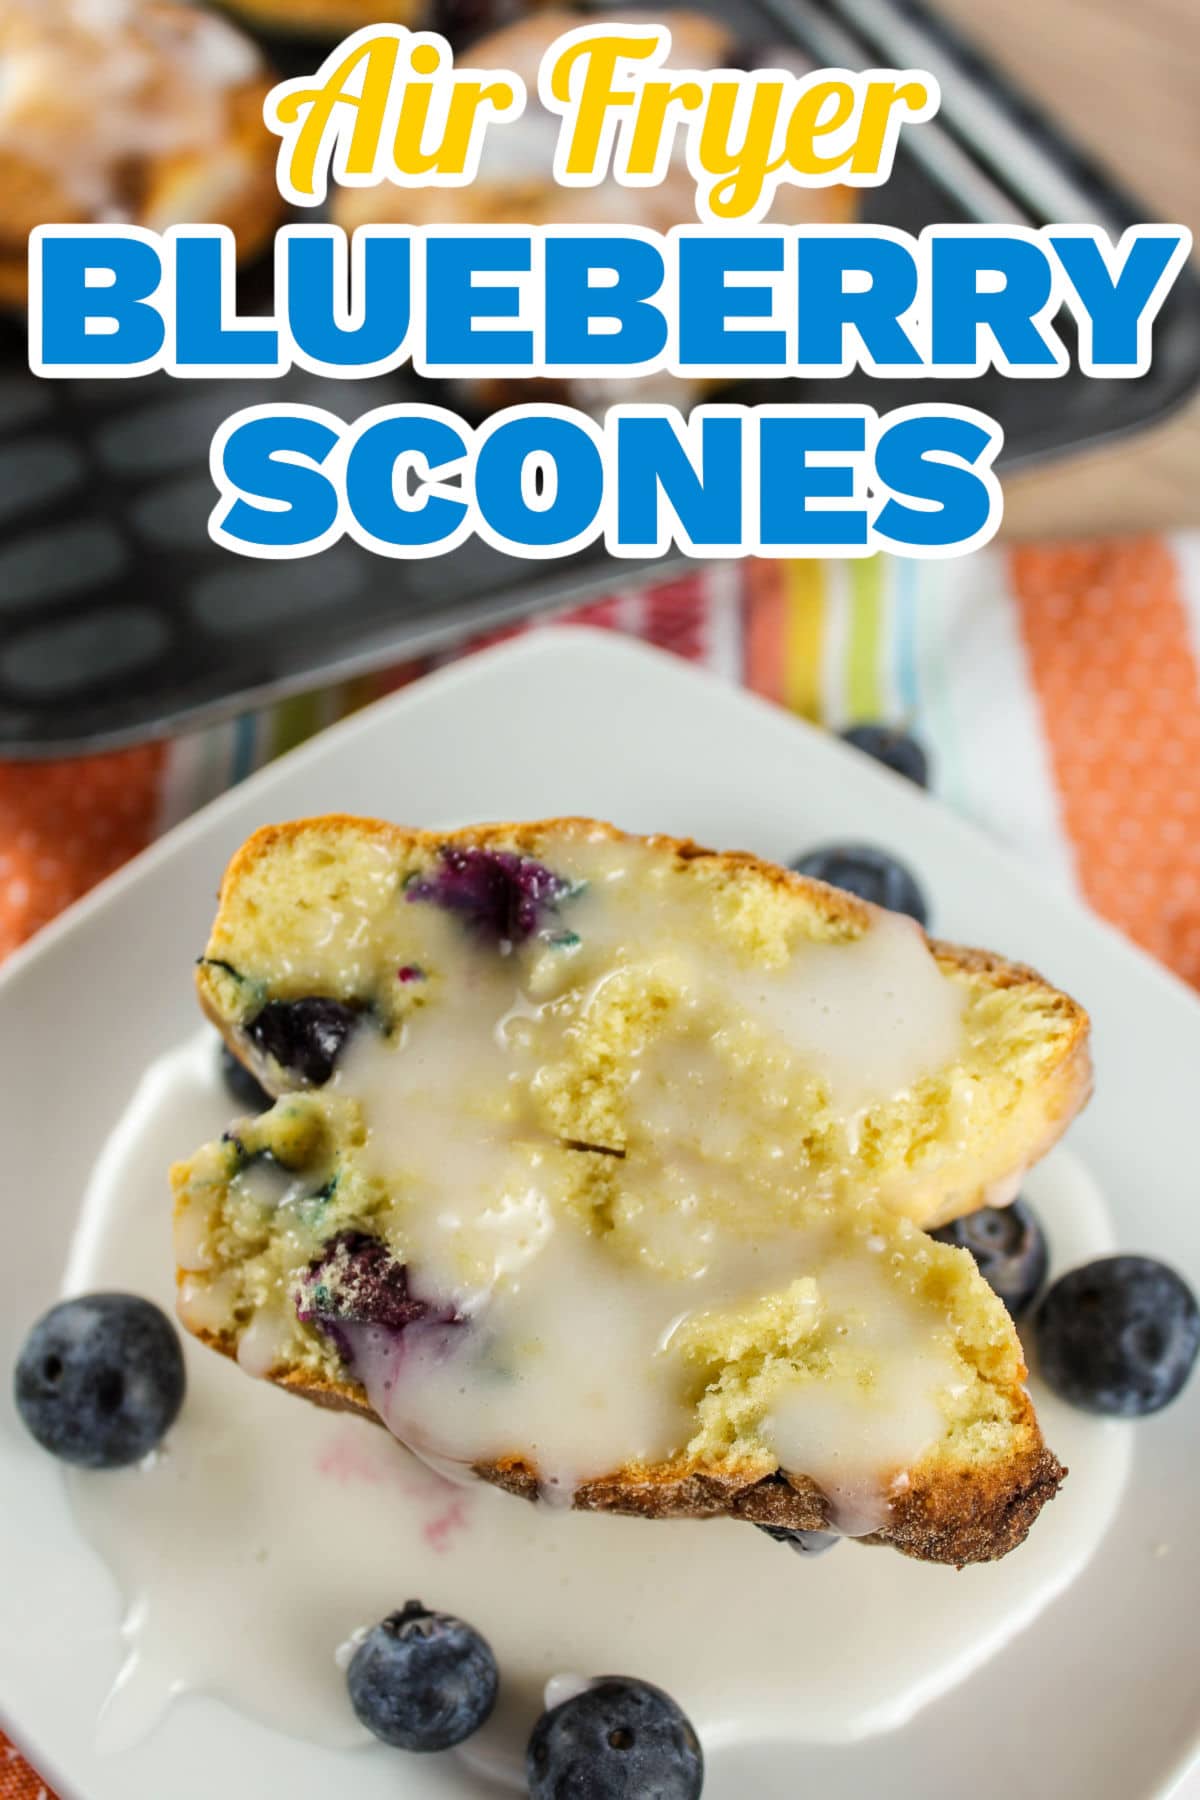 The Air Fryer Blueberry Scones are delicious breakfast biscuits that are packed with fruit and drizzled with a light sweet glaze. You will love these sweet treats and they're done in 15 minutes from start to finish!  via @foodhussy